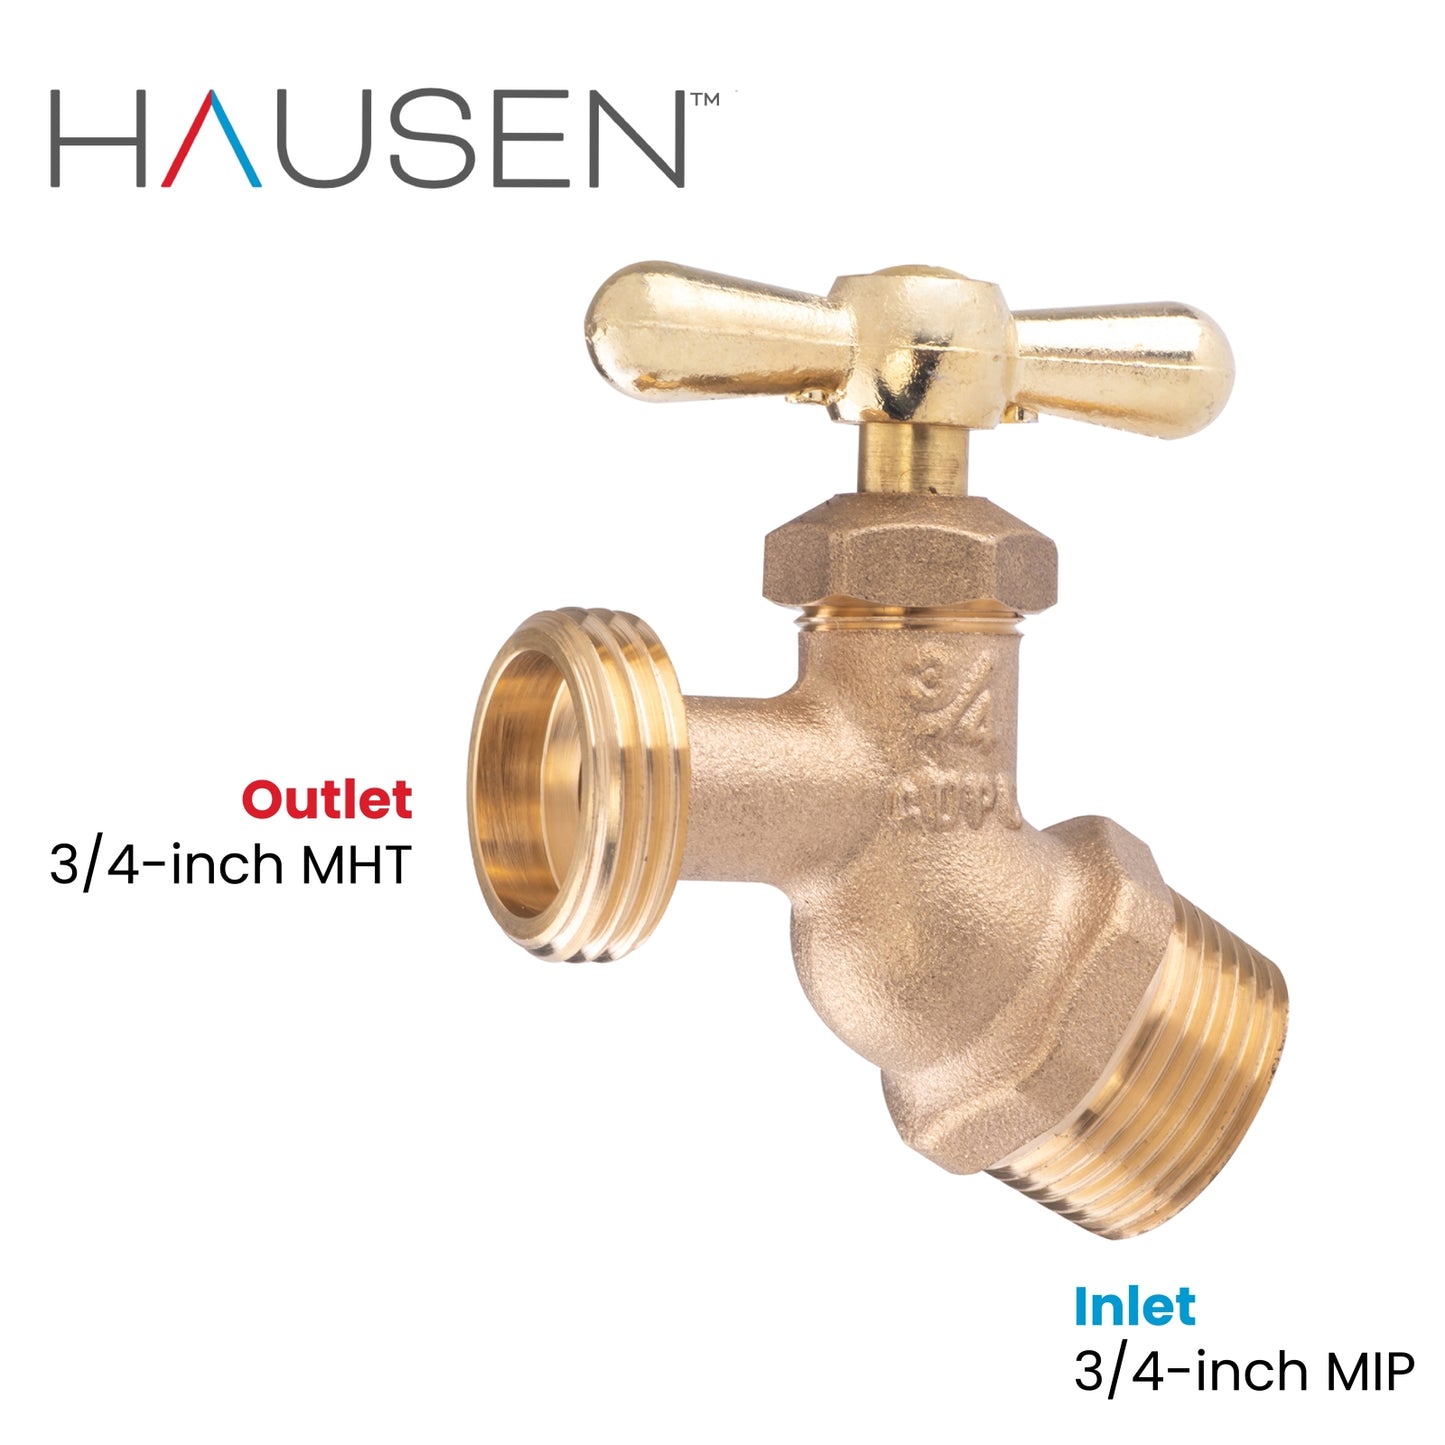 Hausen 3/4-inch MIP (Male Iron Pipe) x 3/4-inch MHT (Male Hose Thread) Brass Angled No-Kink Hose Bibb Valve with Tee Handle Shutoff; cUPC Certified, Compatible with Standard Garden Hoses, 10-pack